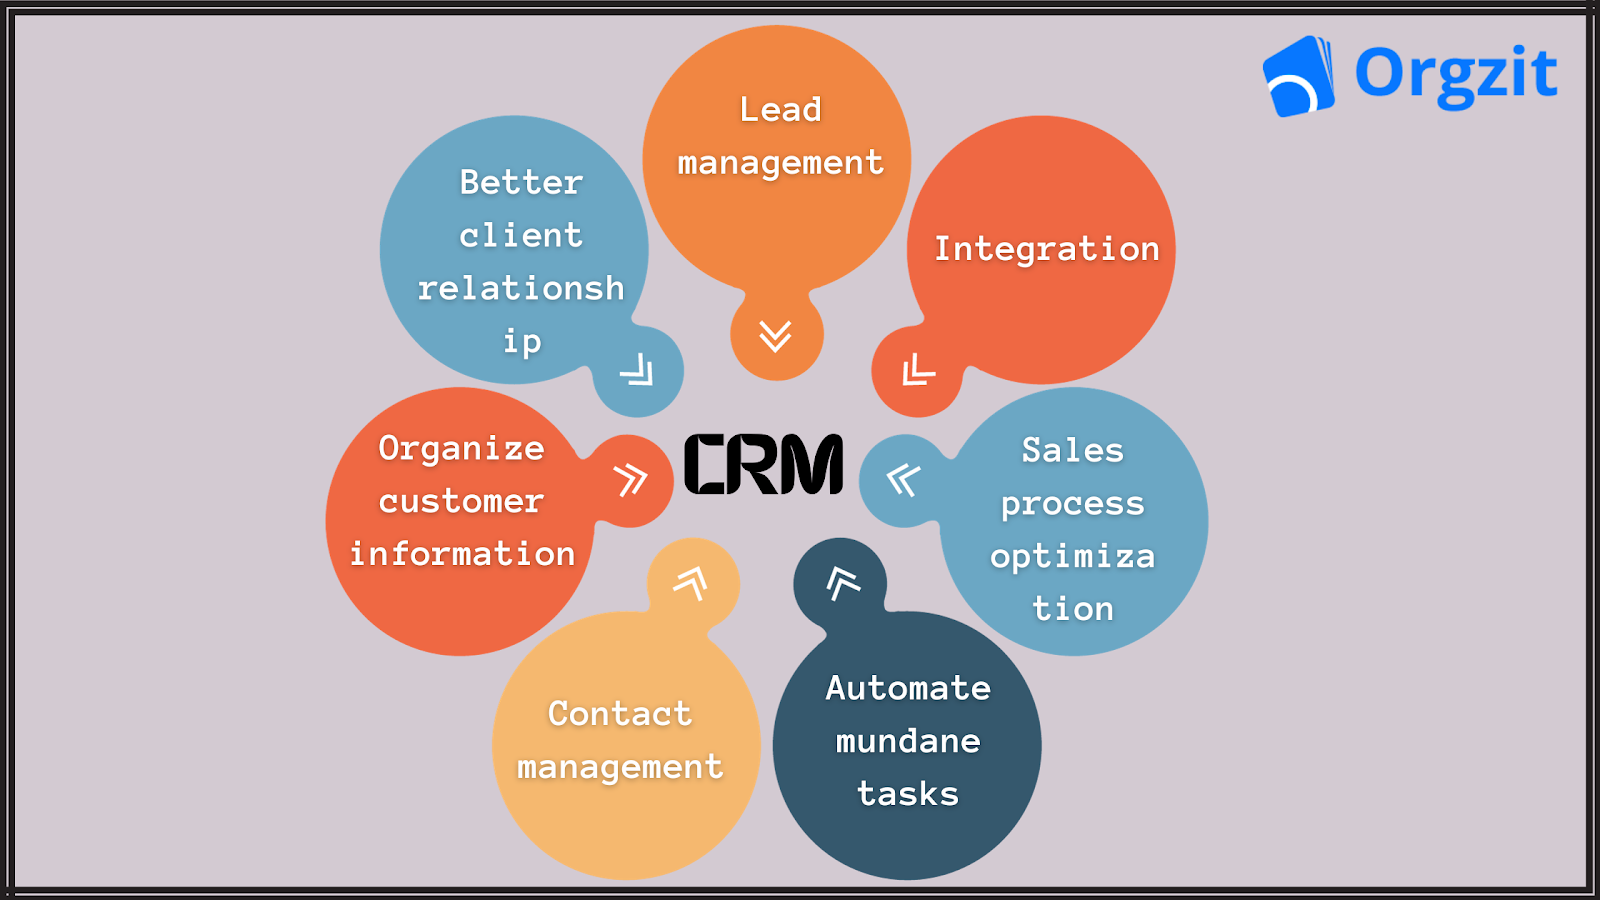 Benefits of a CRM for small businesses